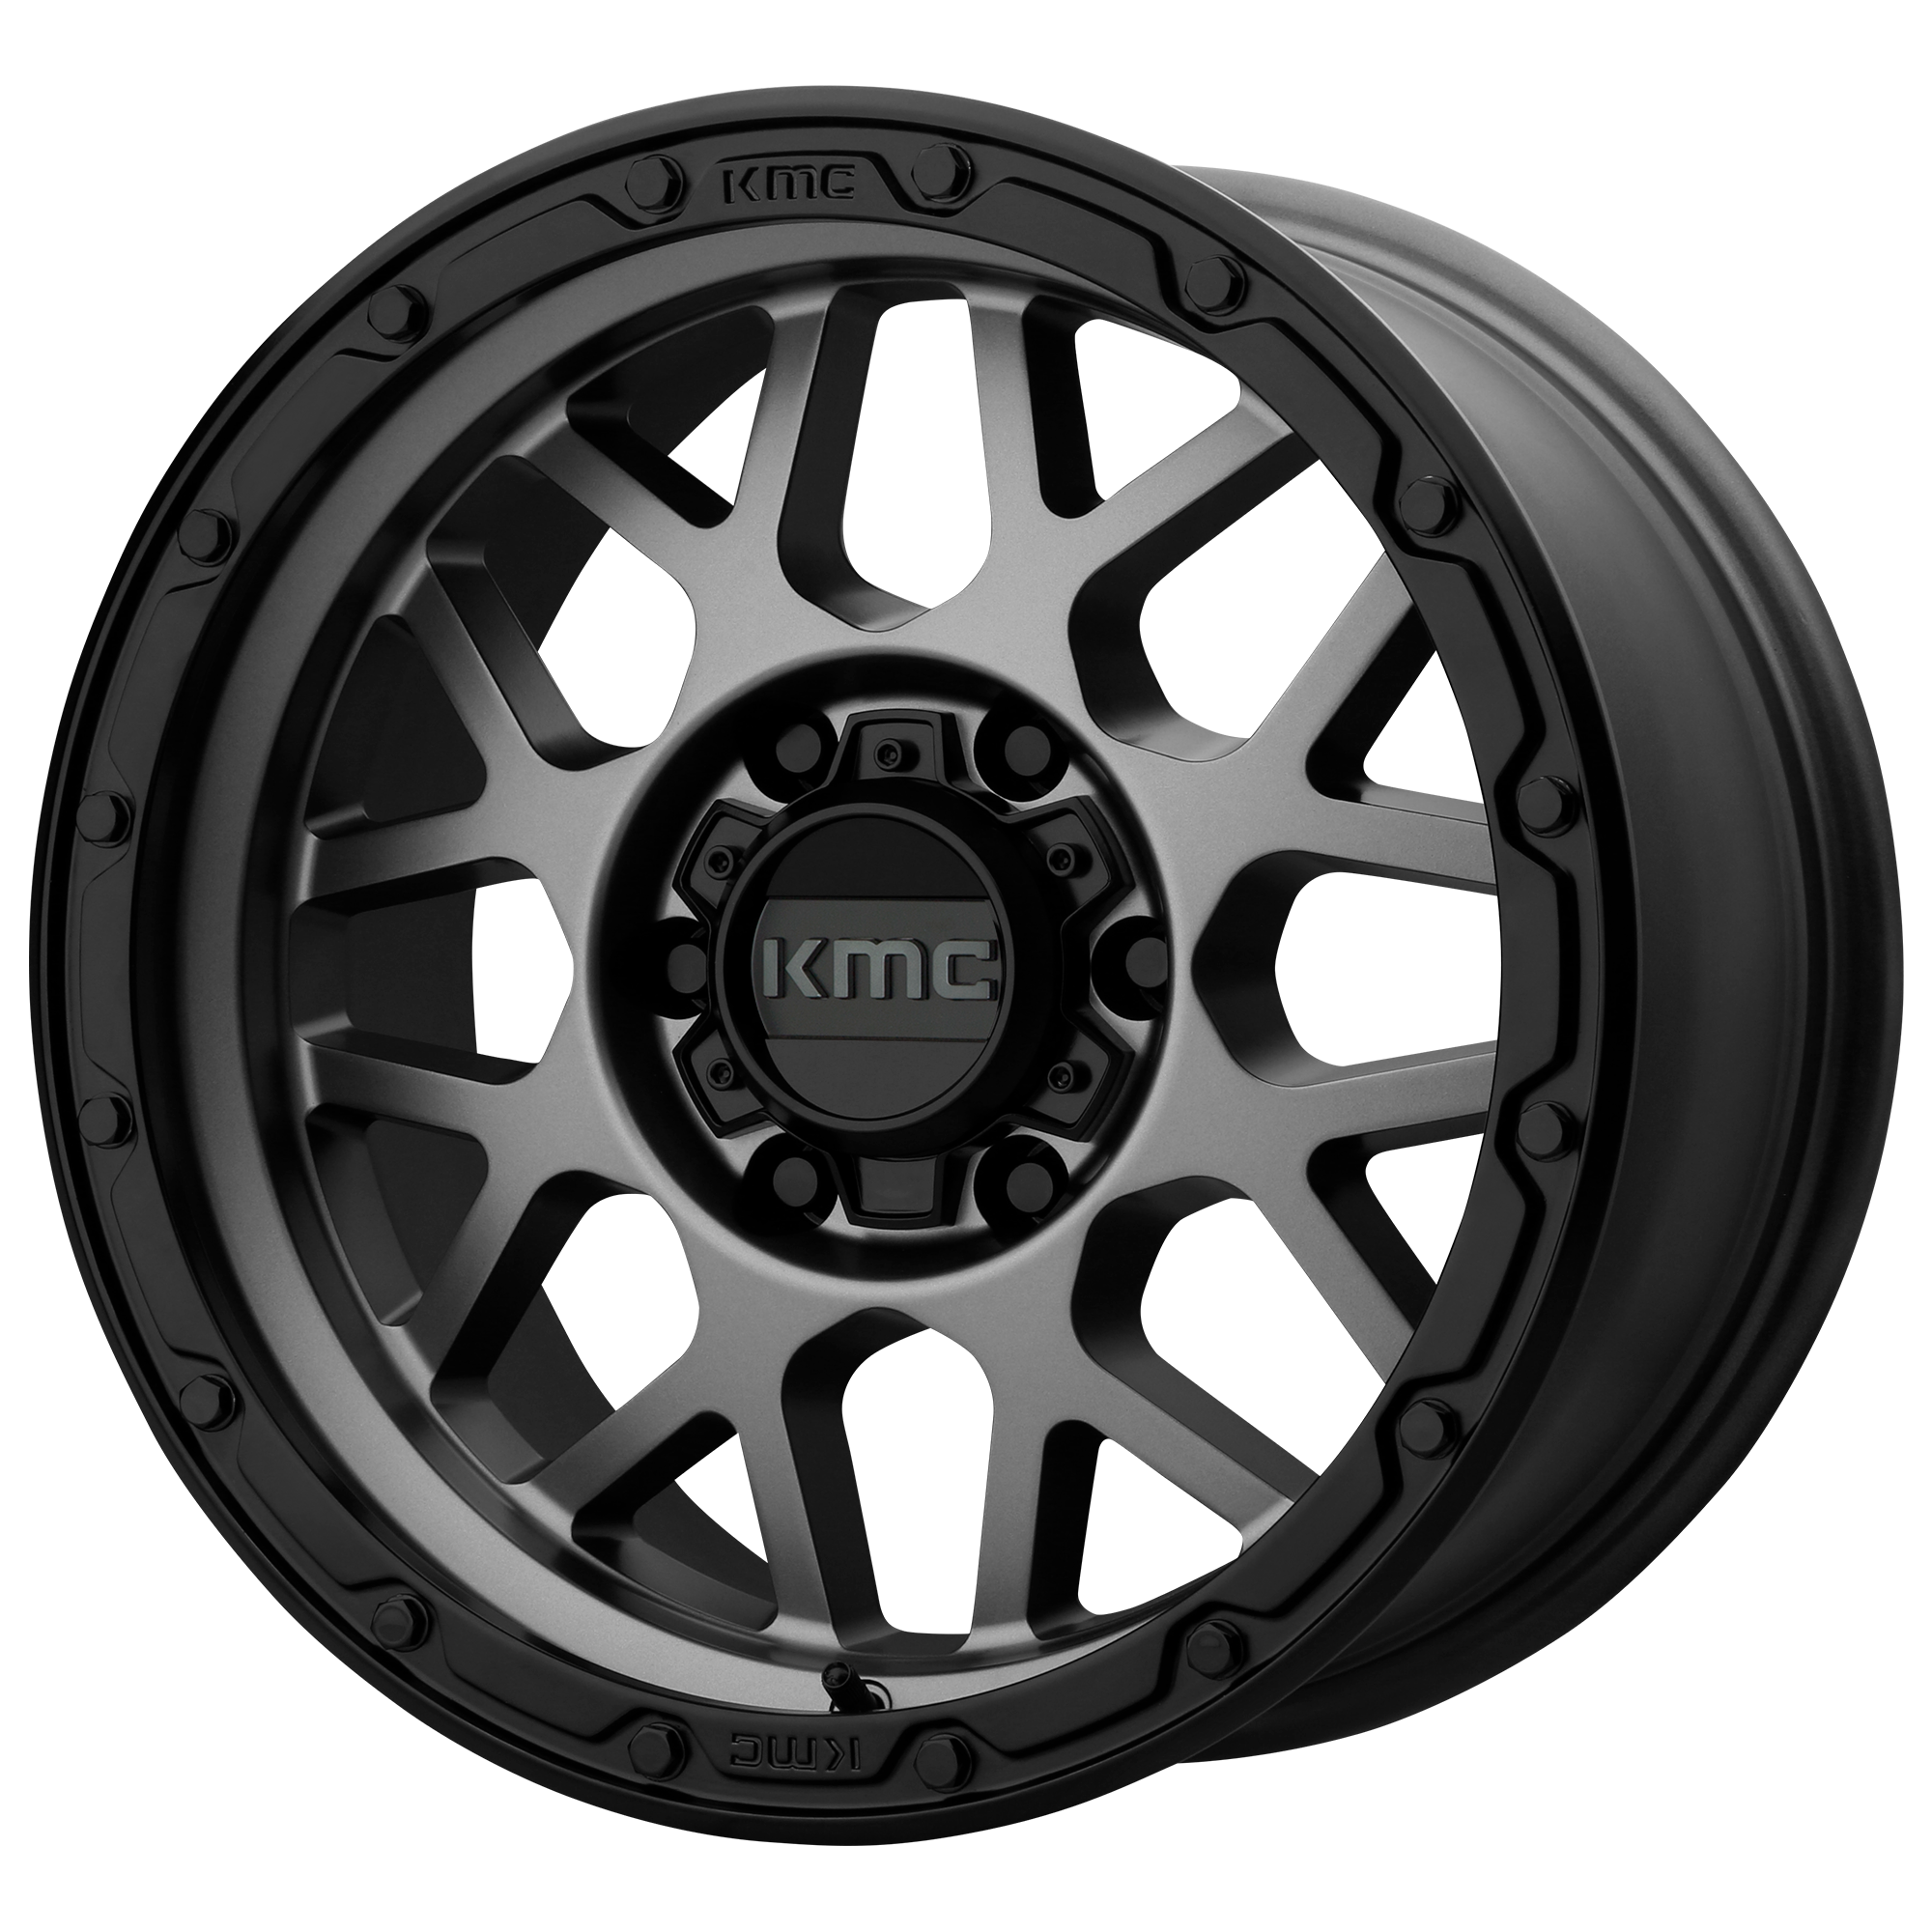 GRENADE OFF-ROAD 17x9 8x165.10 MATTE GRAY W/ MATTE BLACK LIP (18 mm) - Tires and Engine Performance